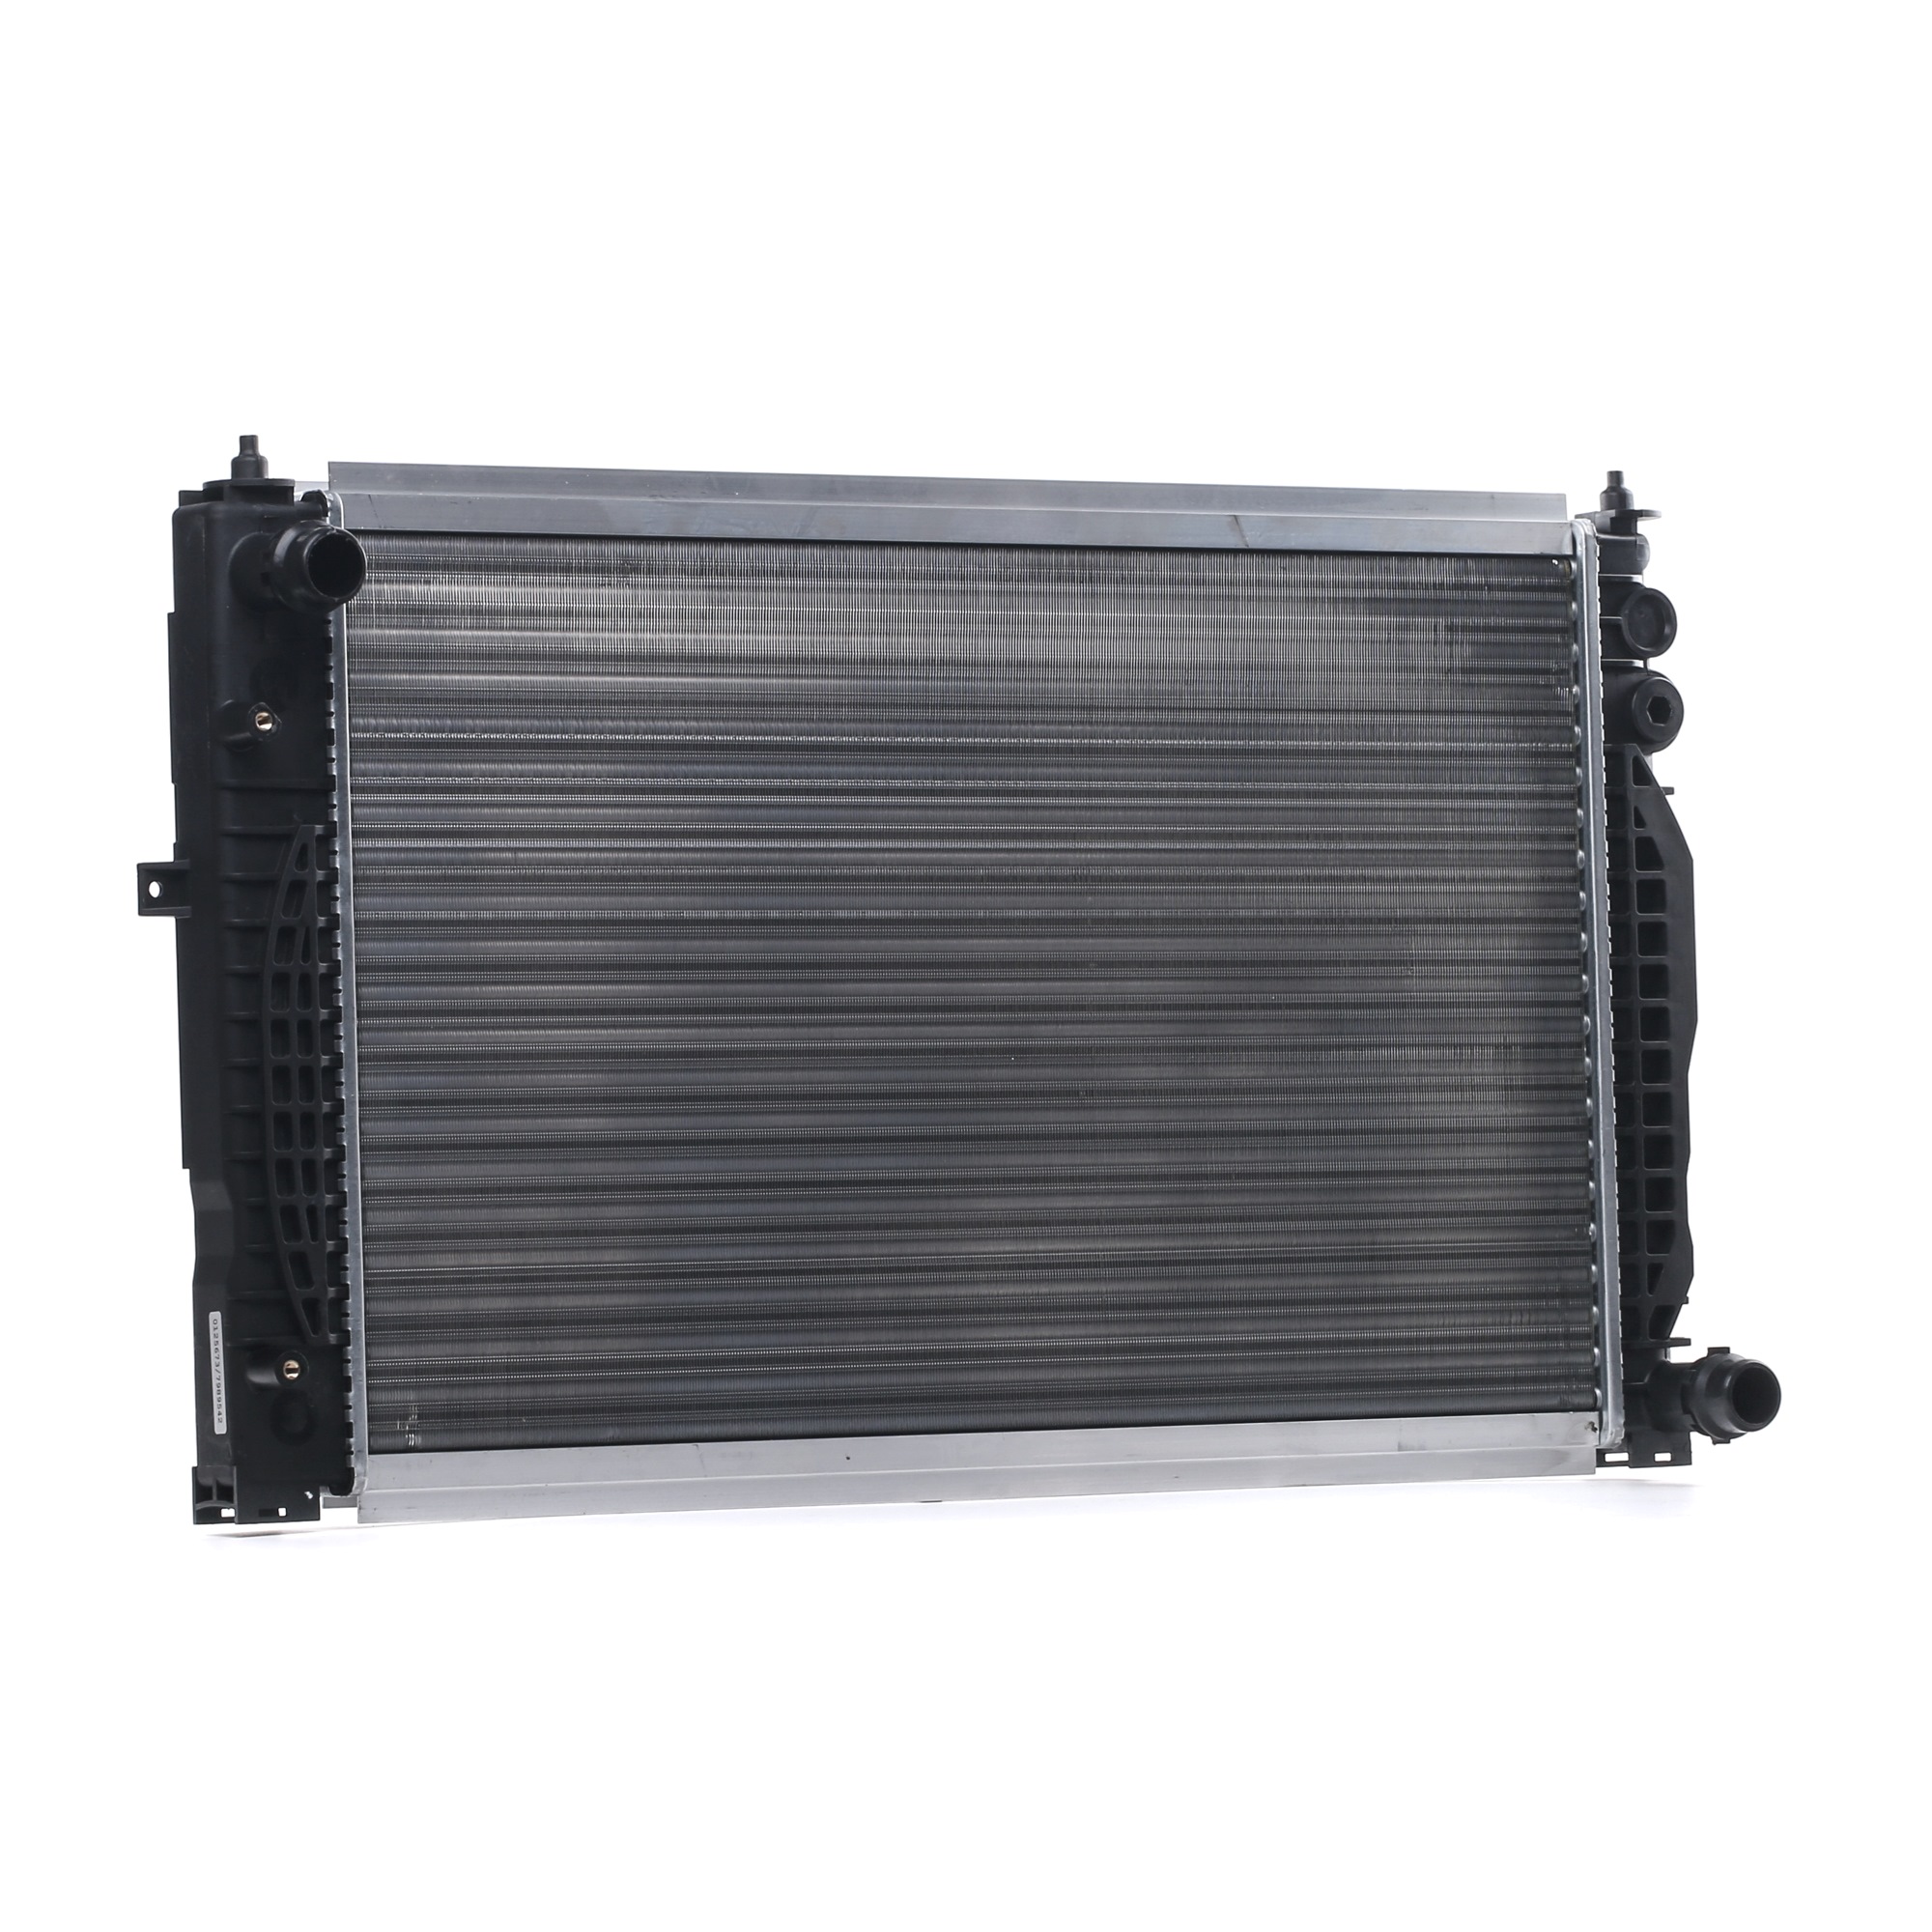 STARK SKRD-0120395 Engine radiator for vehicles with/without air conditioning, 630 x 397 x 32 mm, with screw, Manual Transmission, Mechanically jointed cooling fins